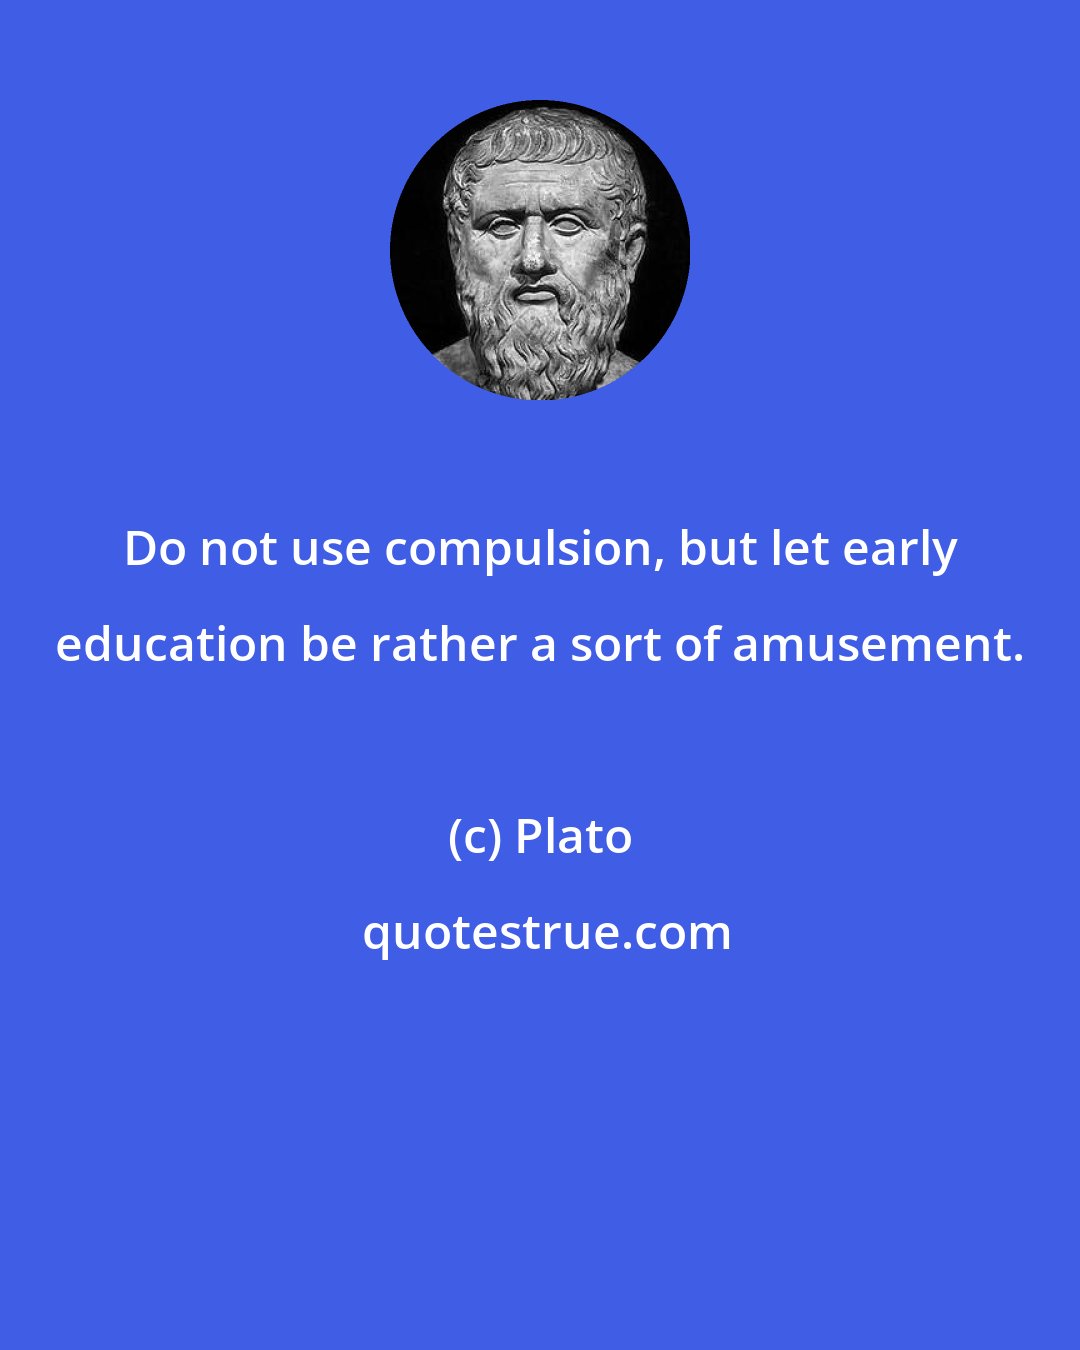 Plato: Do not use compulsion, but let early education be rather a sort of amusement.